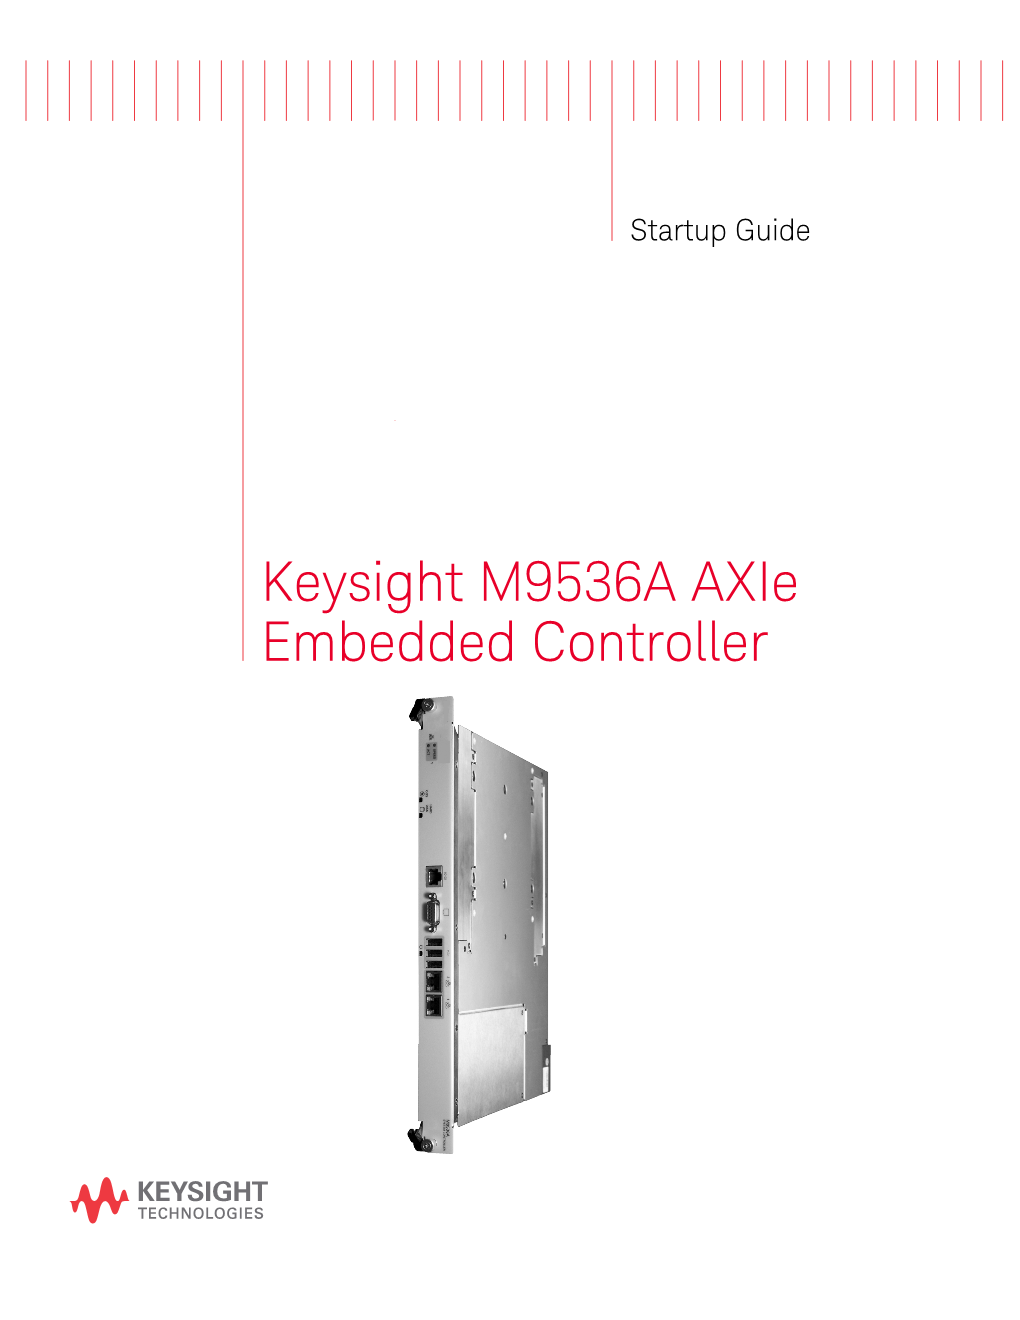 M9536A Axie Embedded Controller